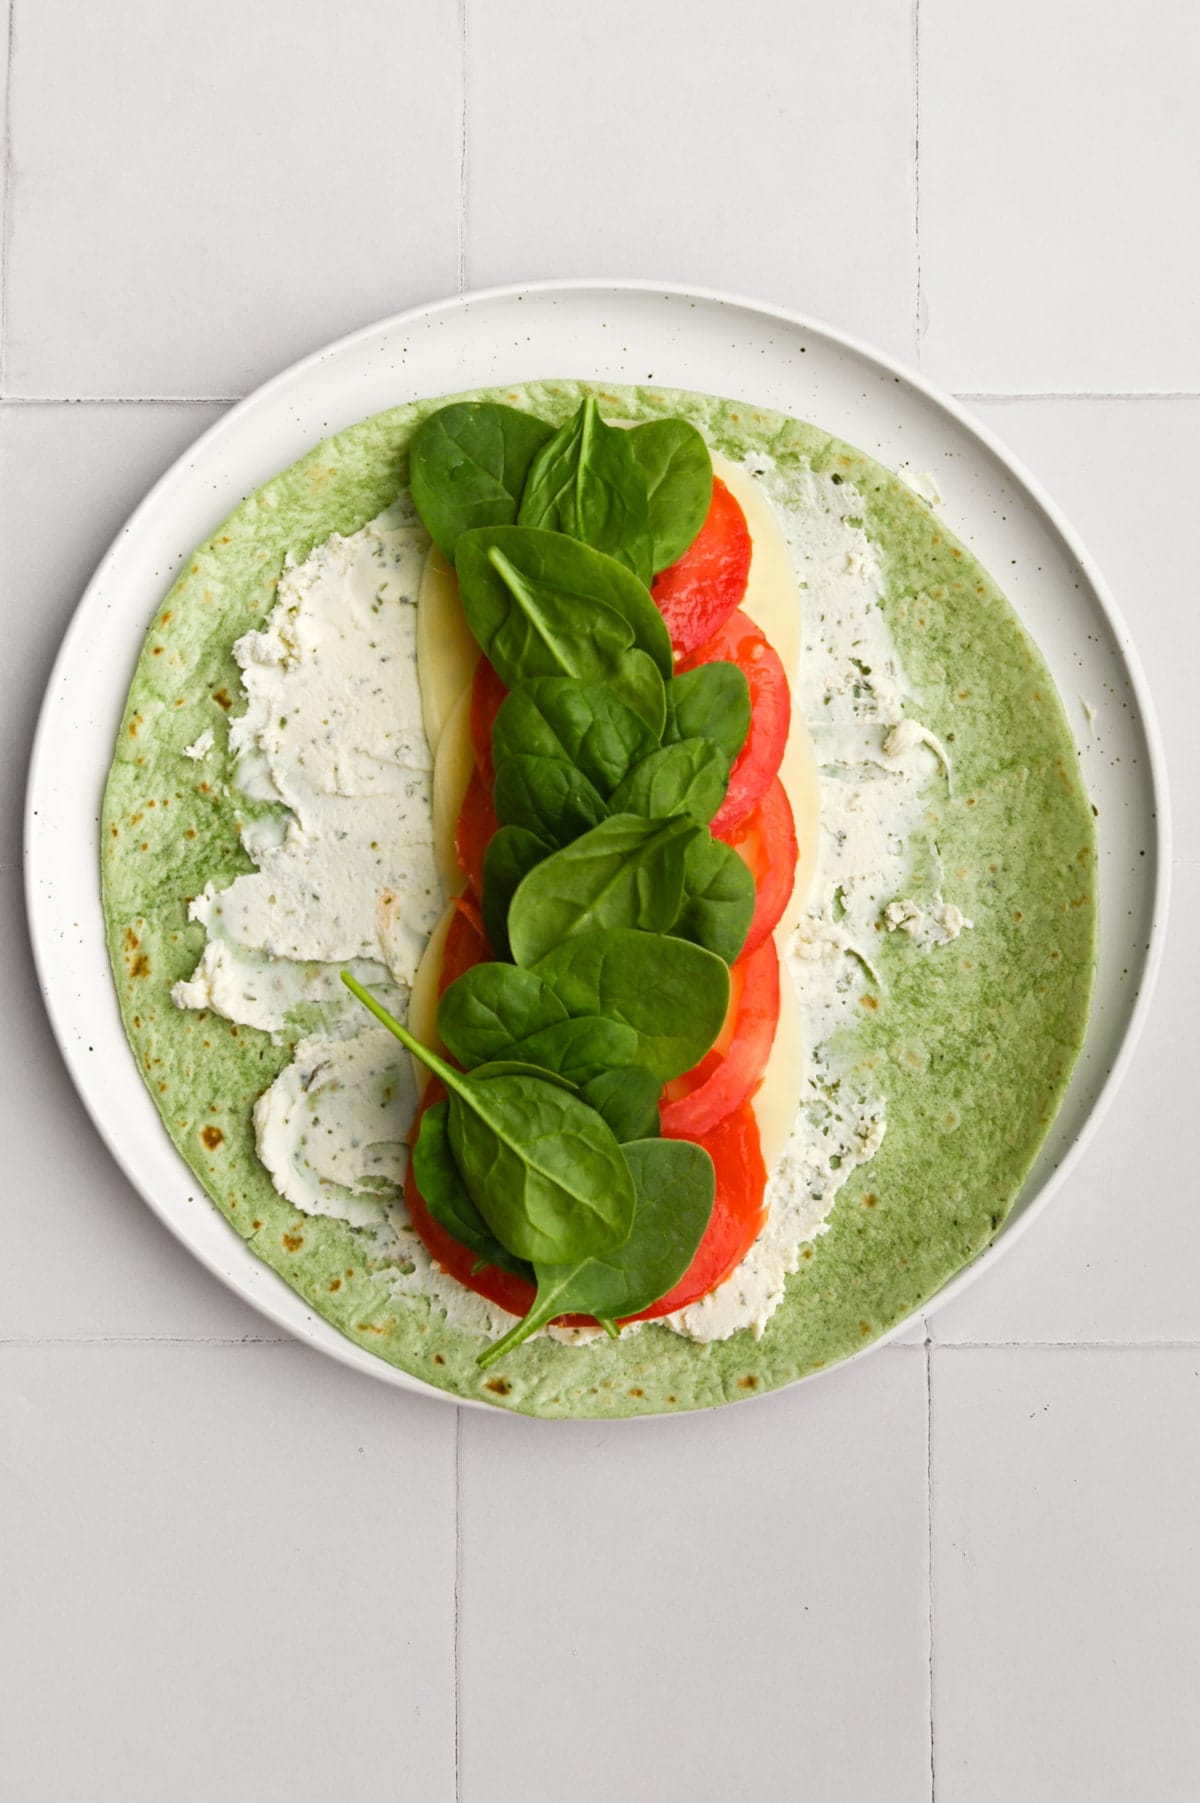 adding spinach to wrap with herbed cheese, provolone, and sliced tomatoes